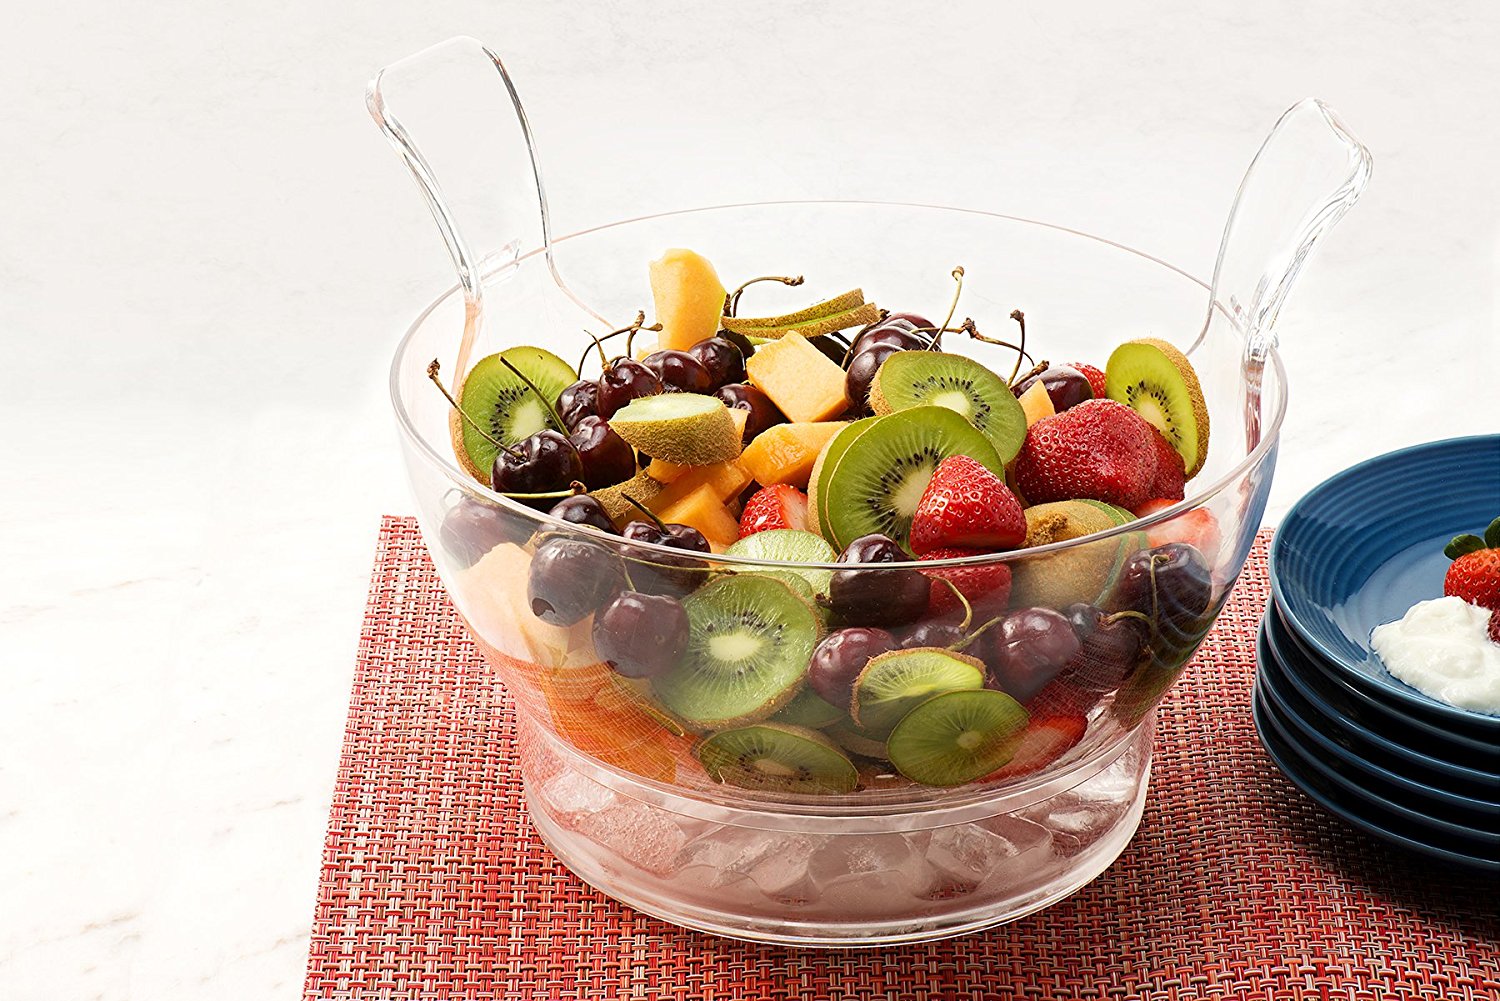 Chilled salad bowl on ice with spoon and fork